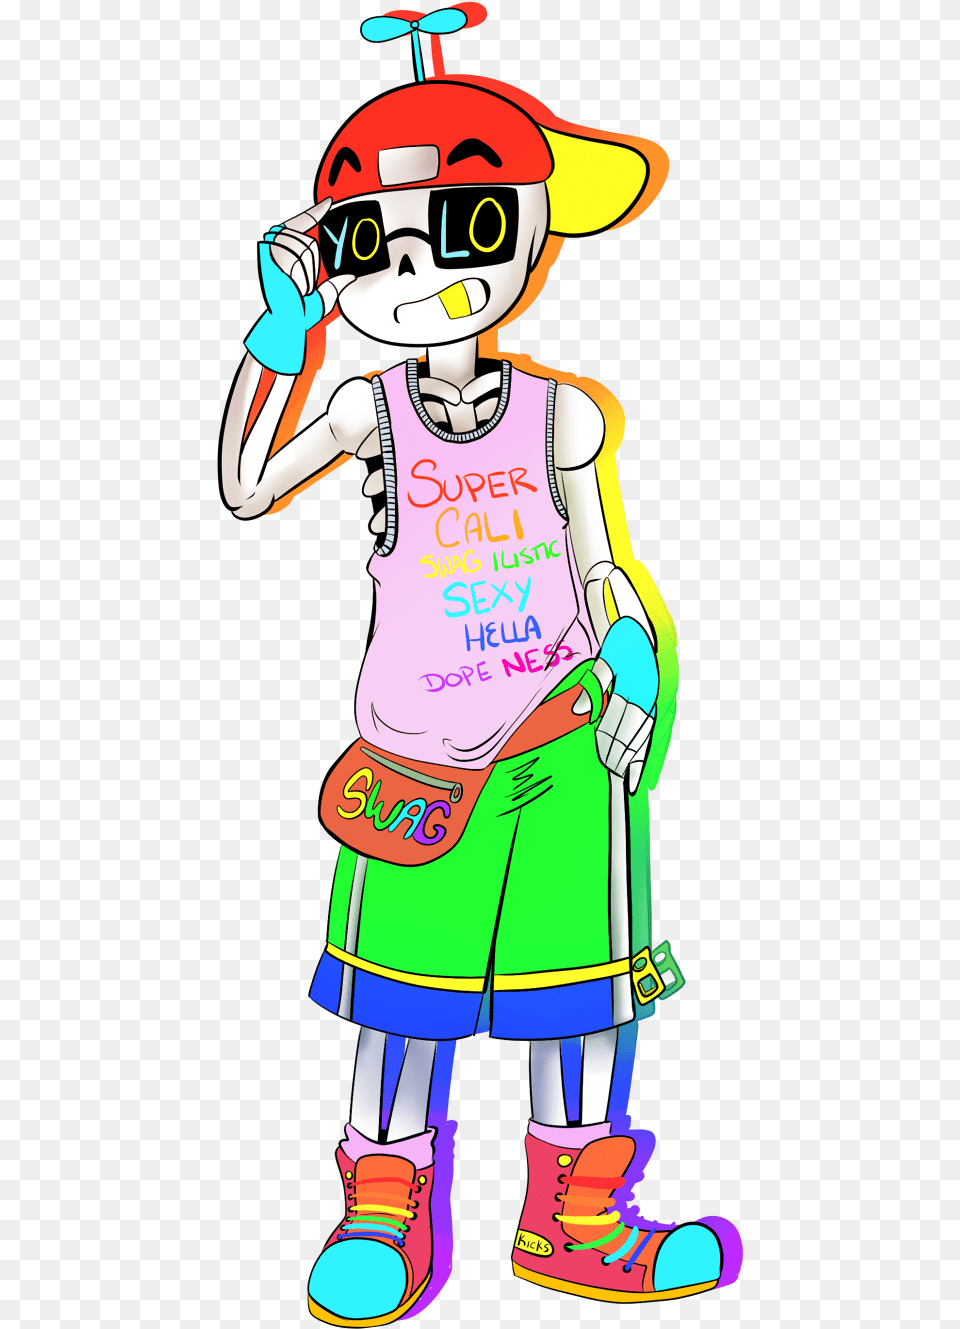 Super Cali Usno Sexy Hella Dope N Undertale Clothing Undertale Fresh Sans, Person, Cartoon, Face, Head Png Image